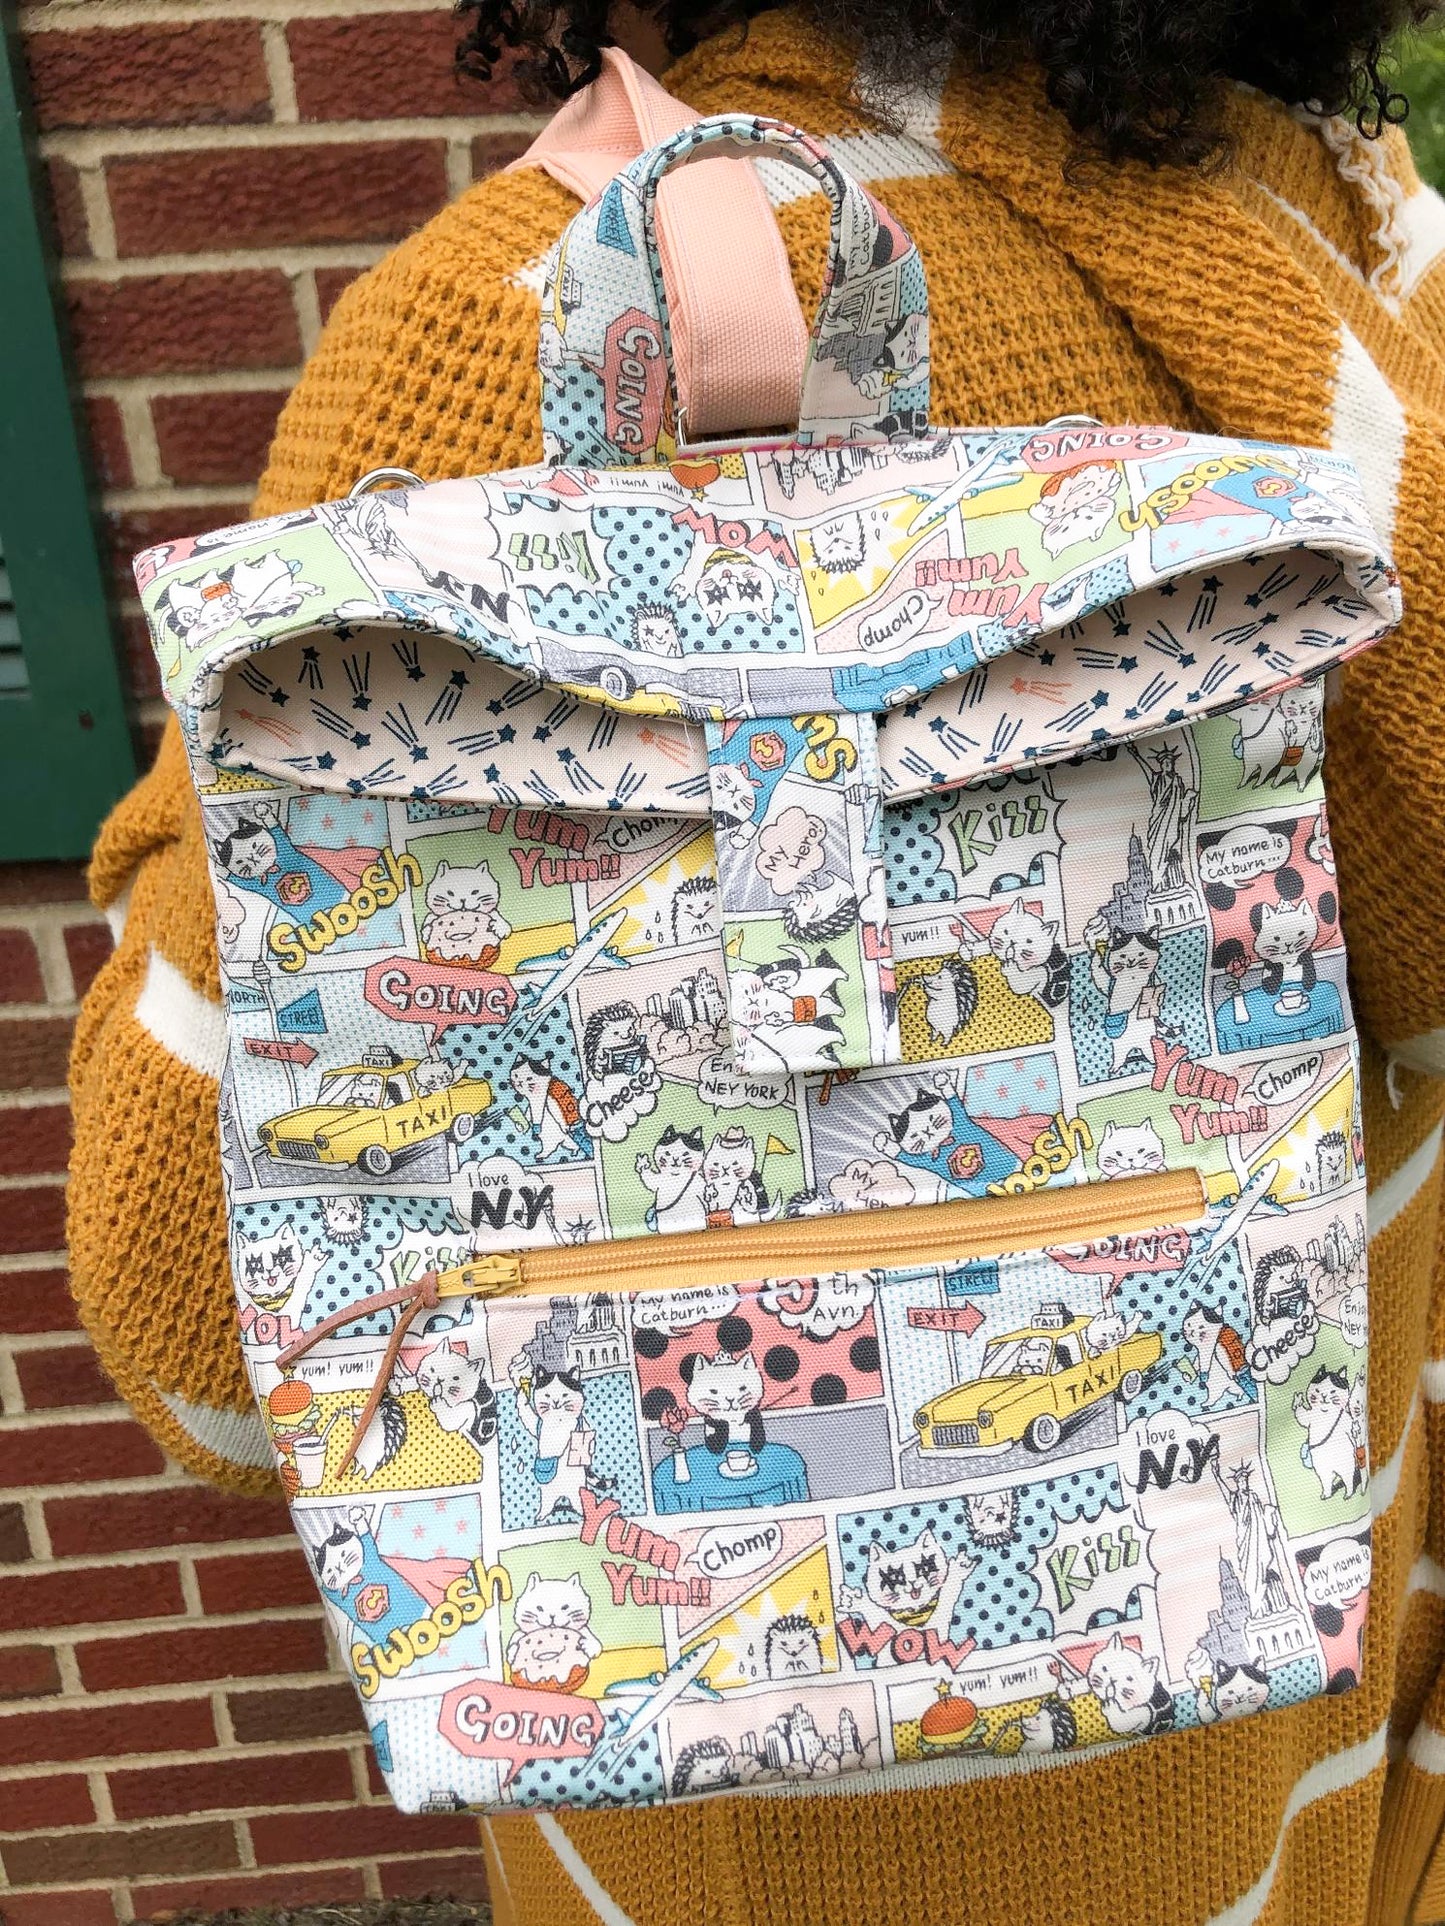 Abbey Convertible Backpack DIY Sewing Pattern – Love You Sew